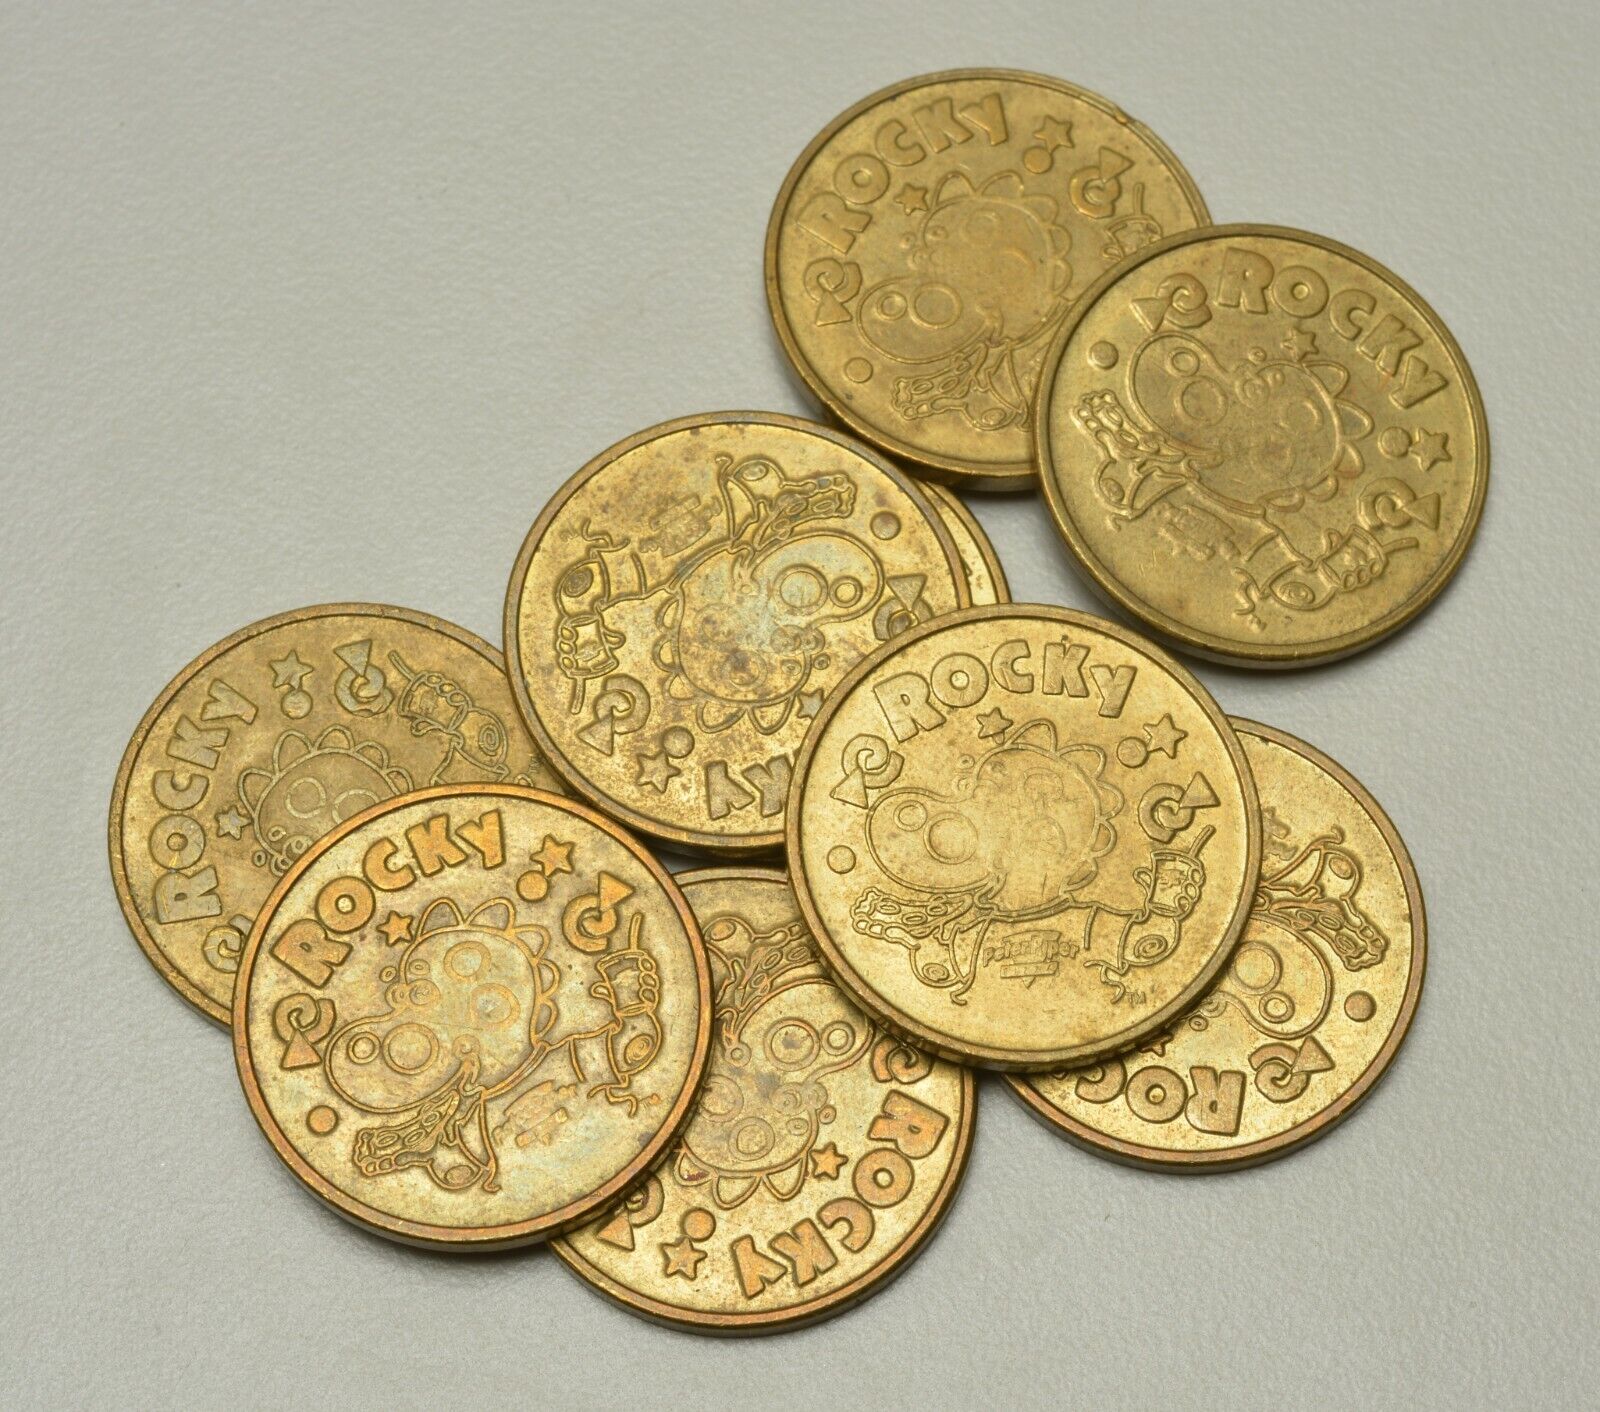 ND. USA. Peter Piper Pizza Tokens. Lot of 9. Brass.